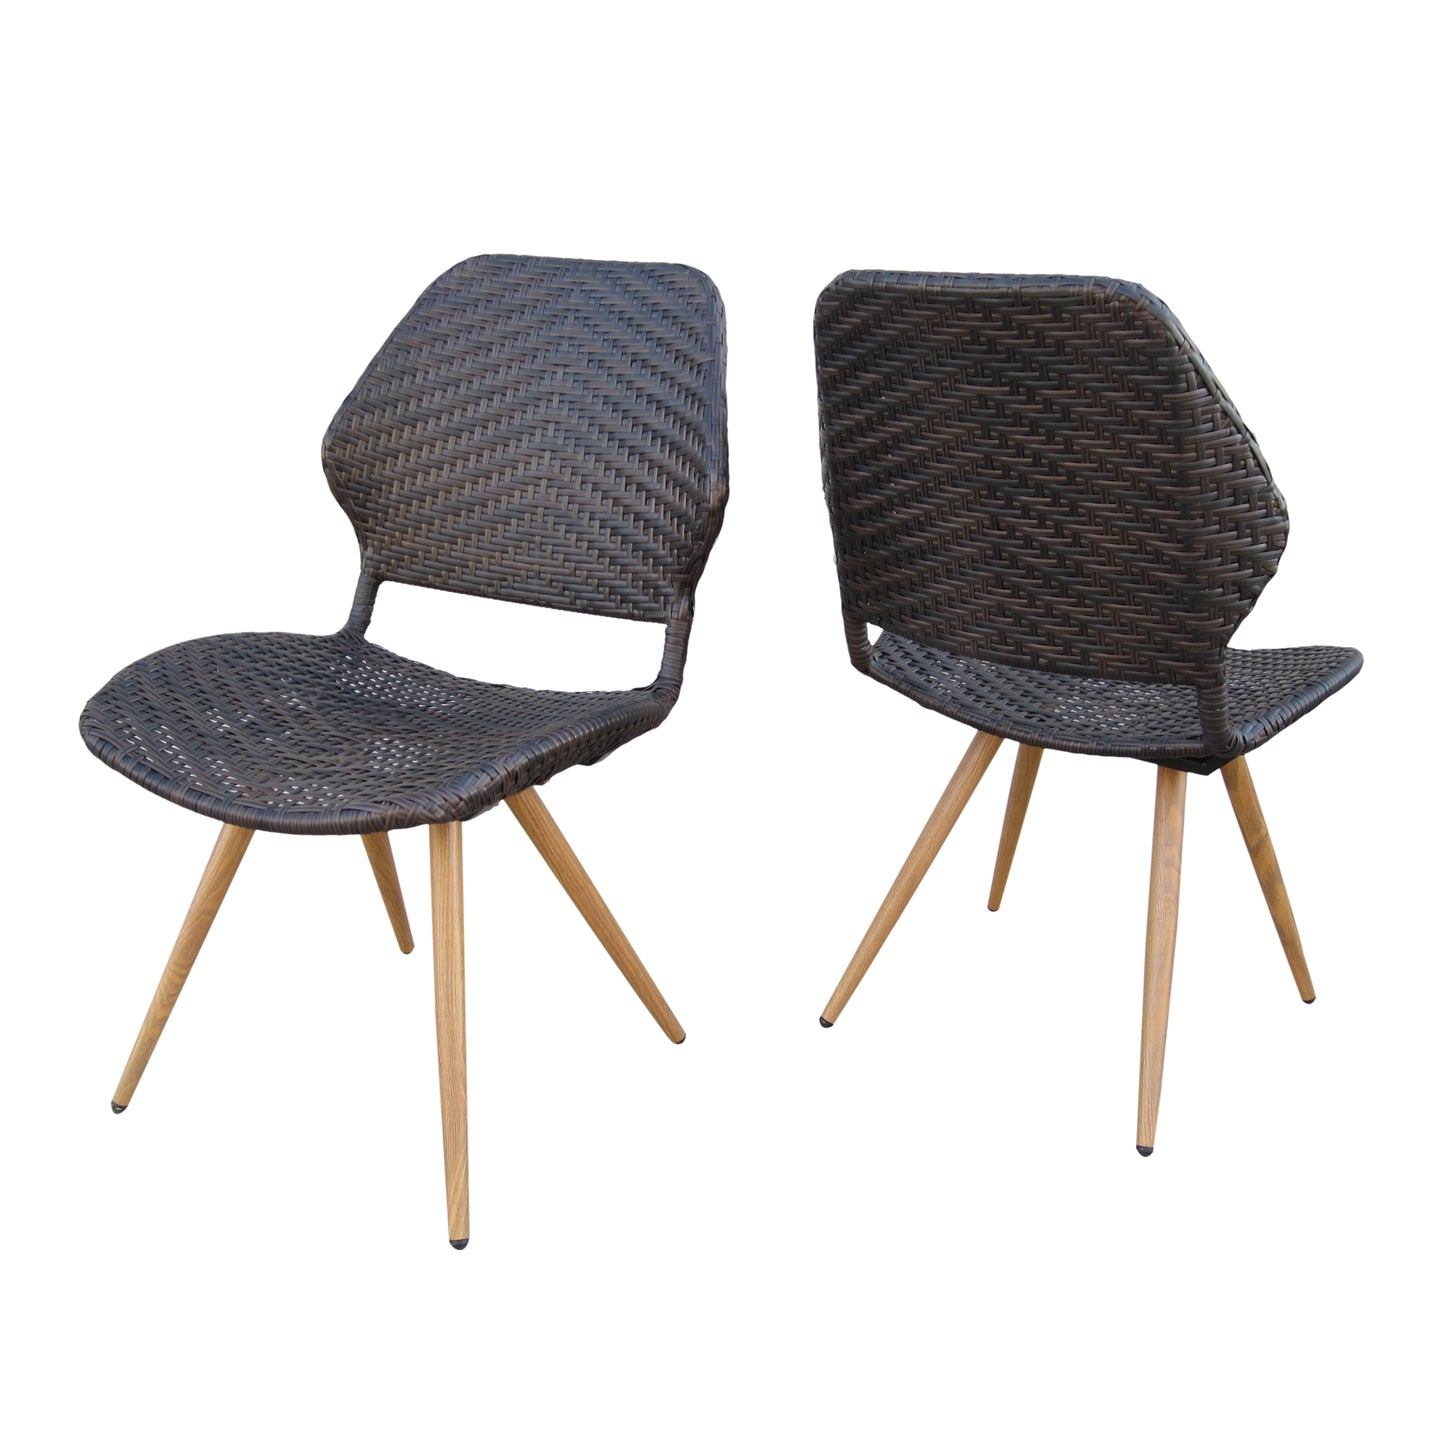 Amaya Outdoor Multi-brown Wicker Dining Chairs with Brown Wood Finish Metal Legs (Set of 2)